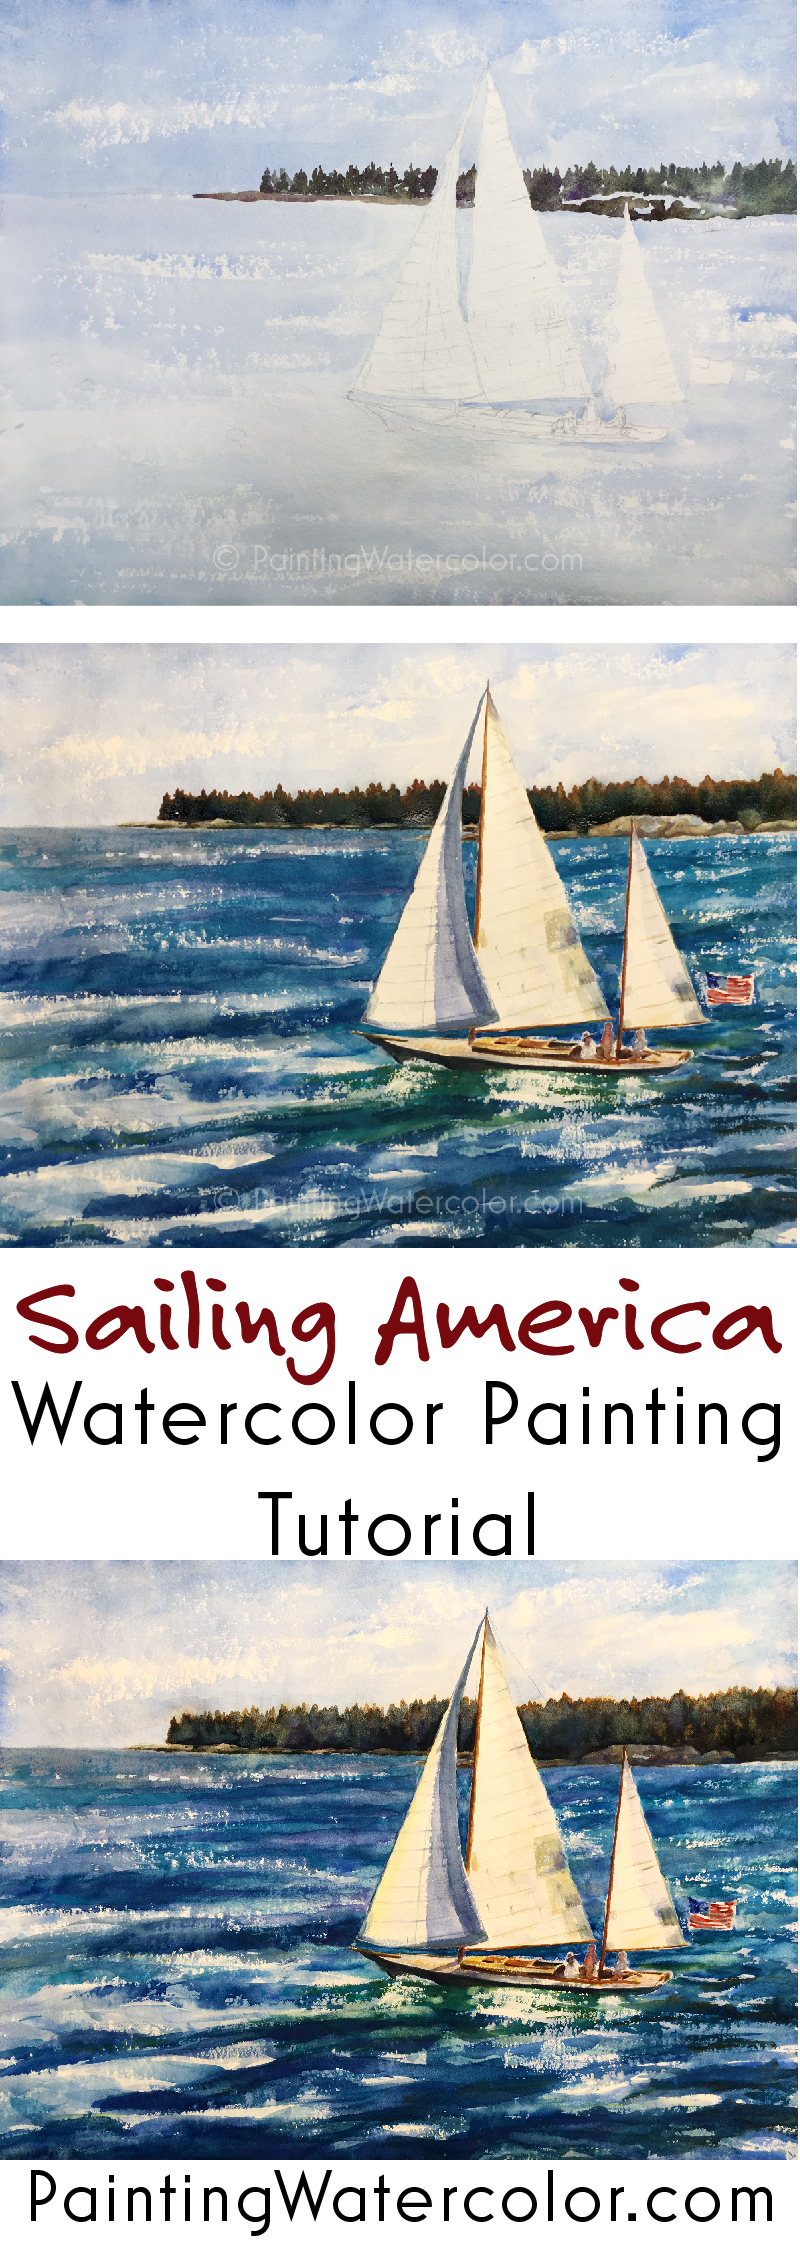 Sailboat Painting Tutorial watercolor painting tutorial by Jennifer Branch